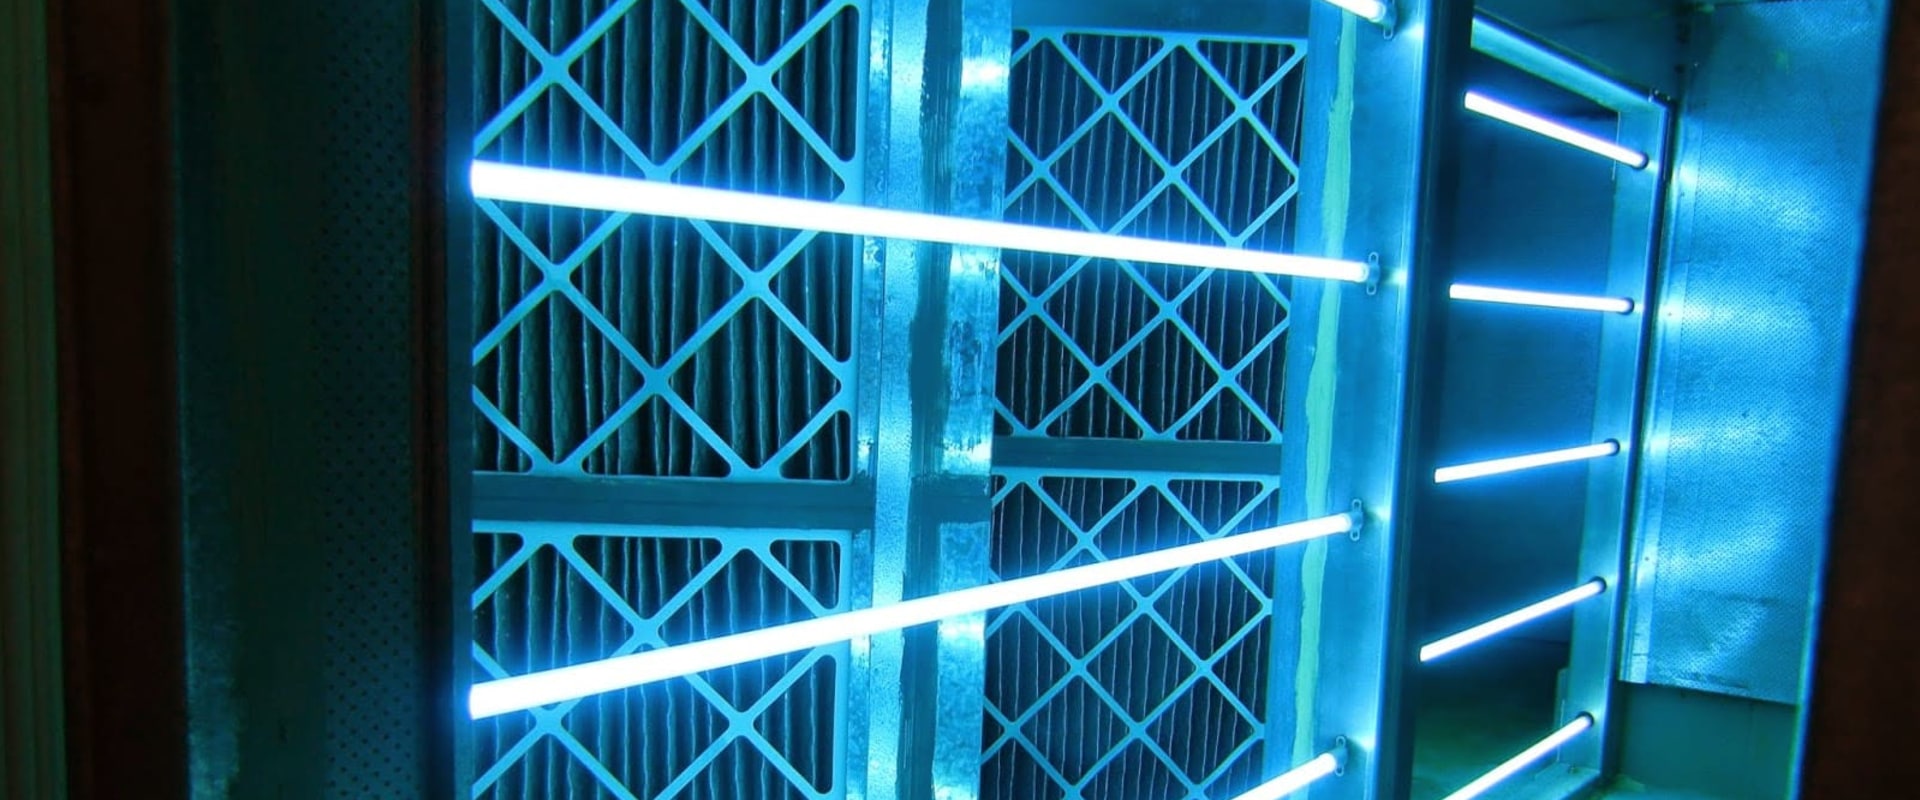 UV Light Installation in West Palm Beach, Florida: How to Maximize Benefits and Extend Life